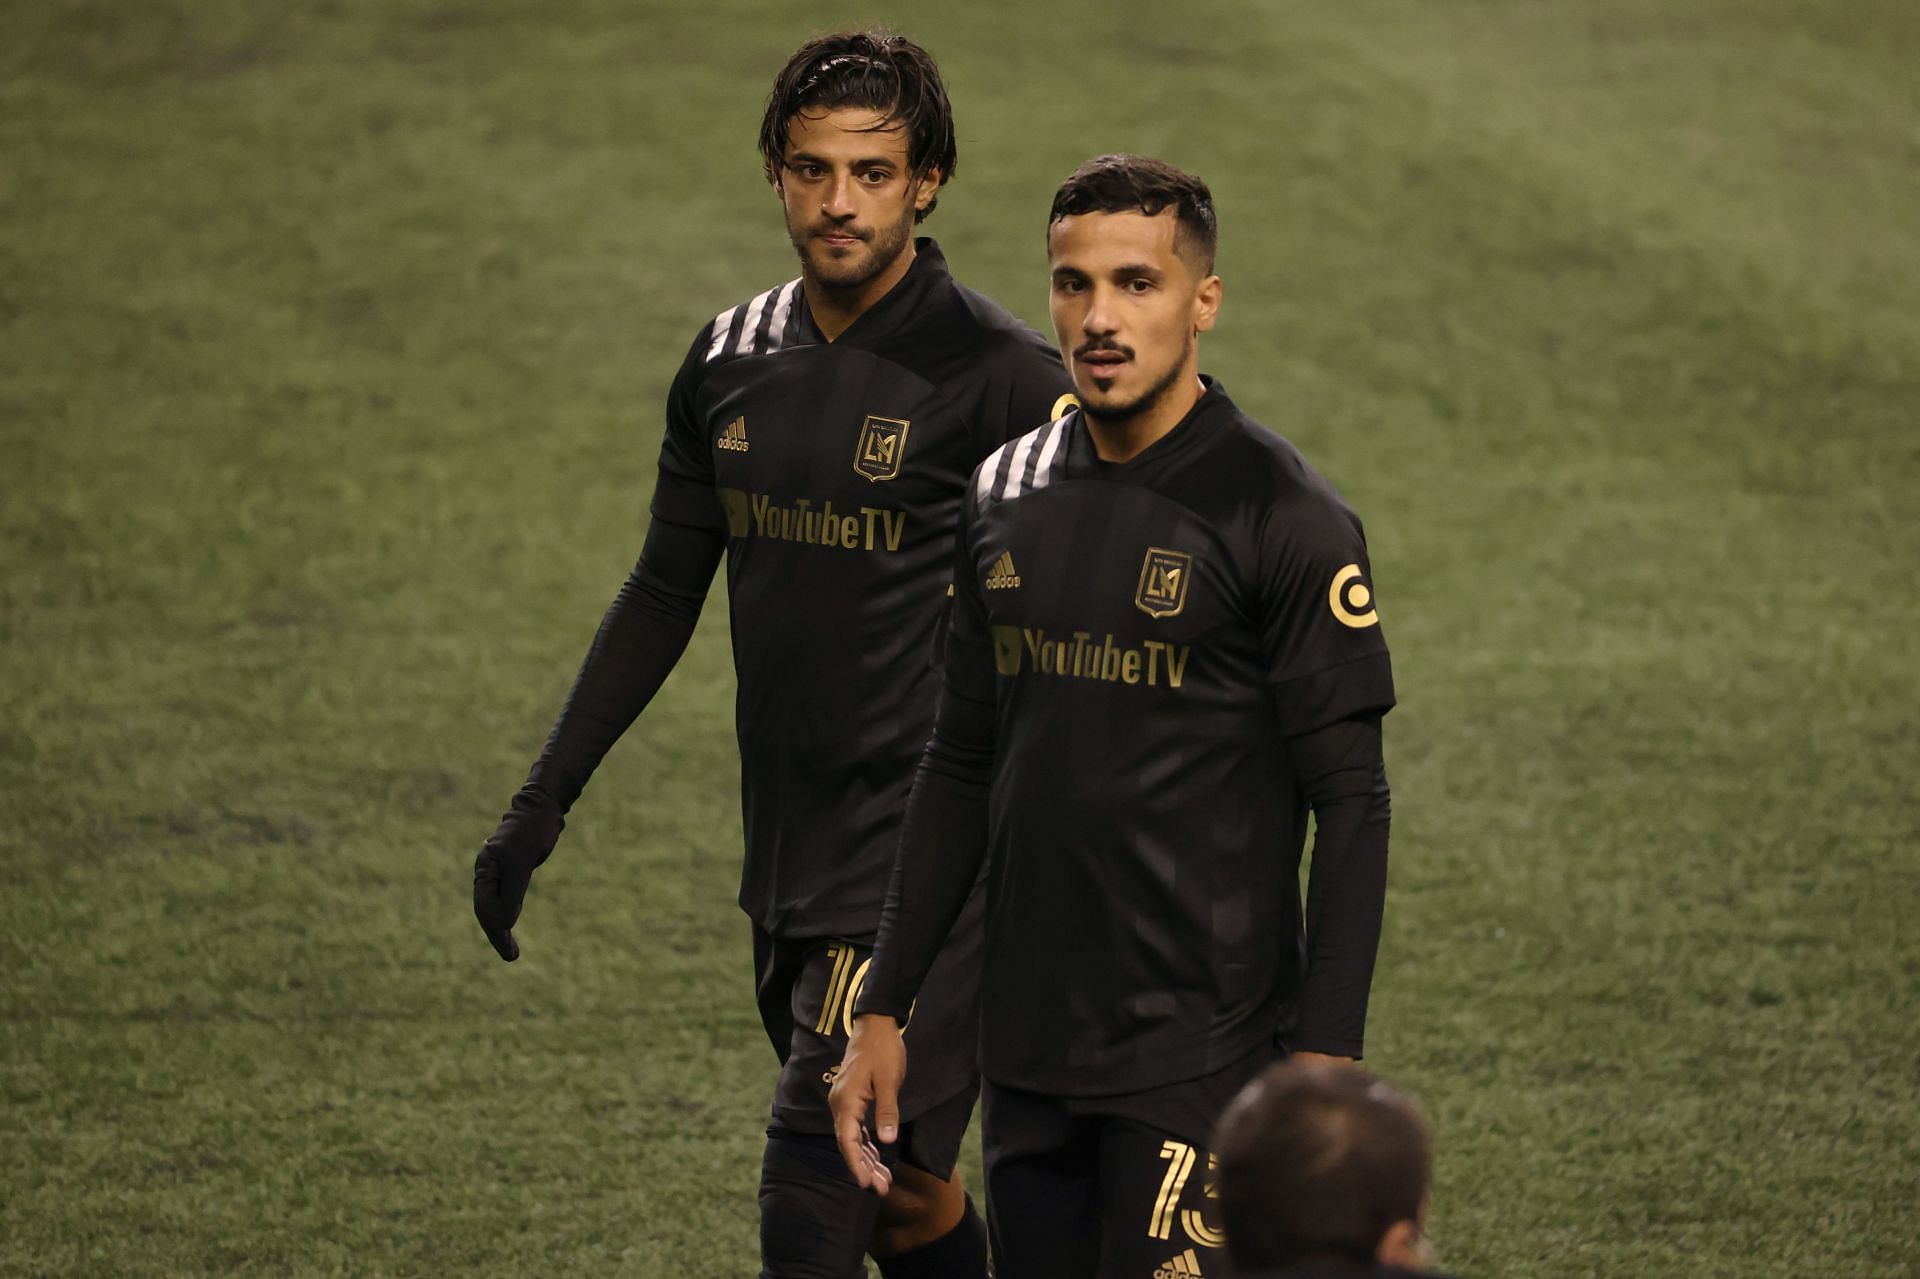 Los Angeles FC will face New York RB in a club friendly